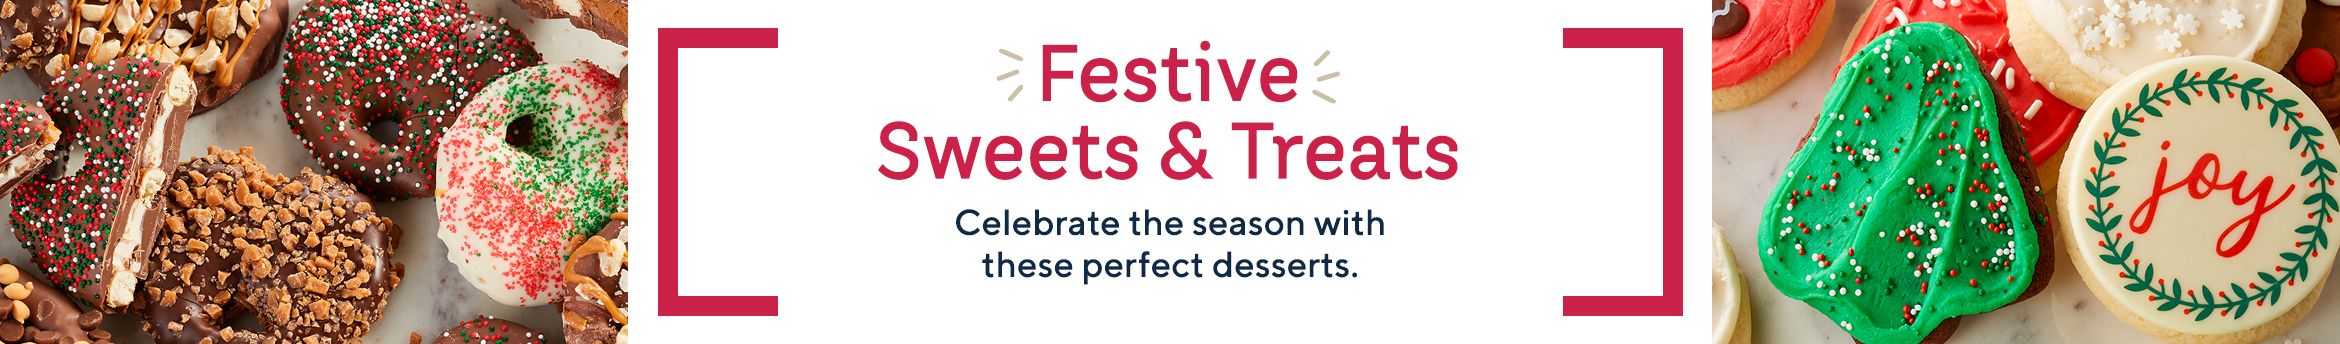 Festive Sweets & Treats.  Celebrate the season with these perfect desserts.